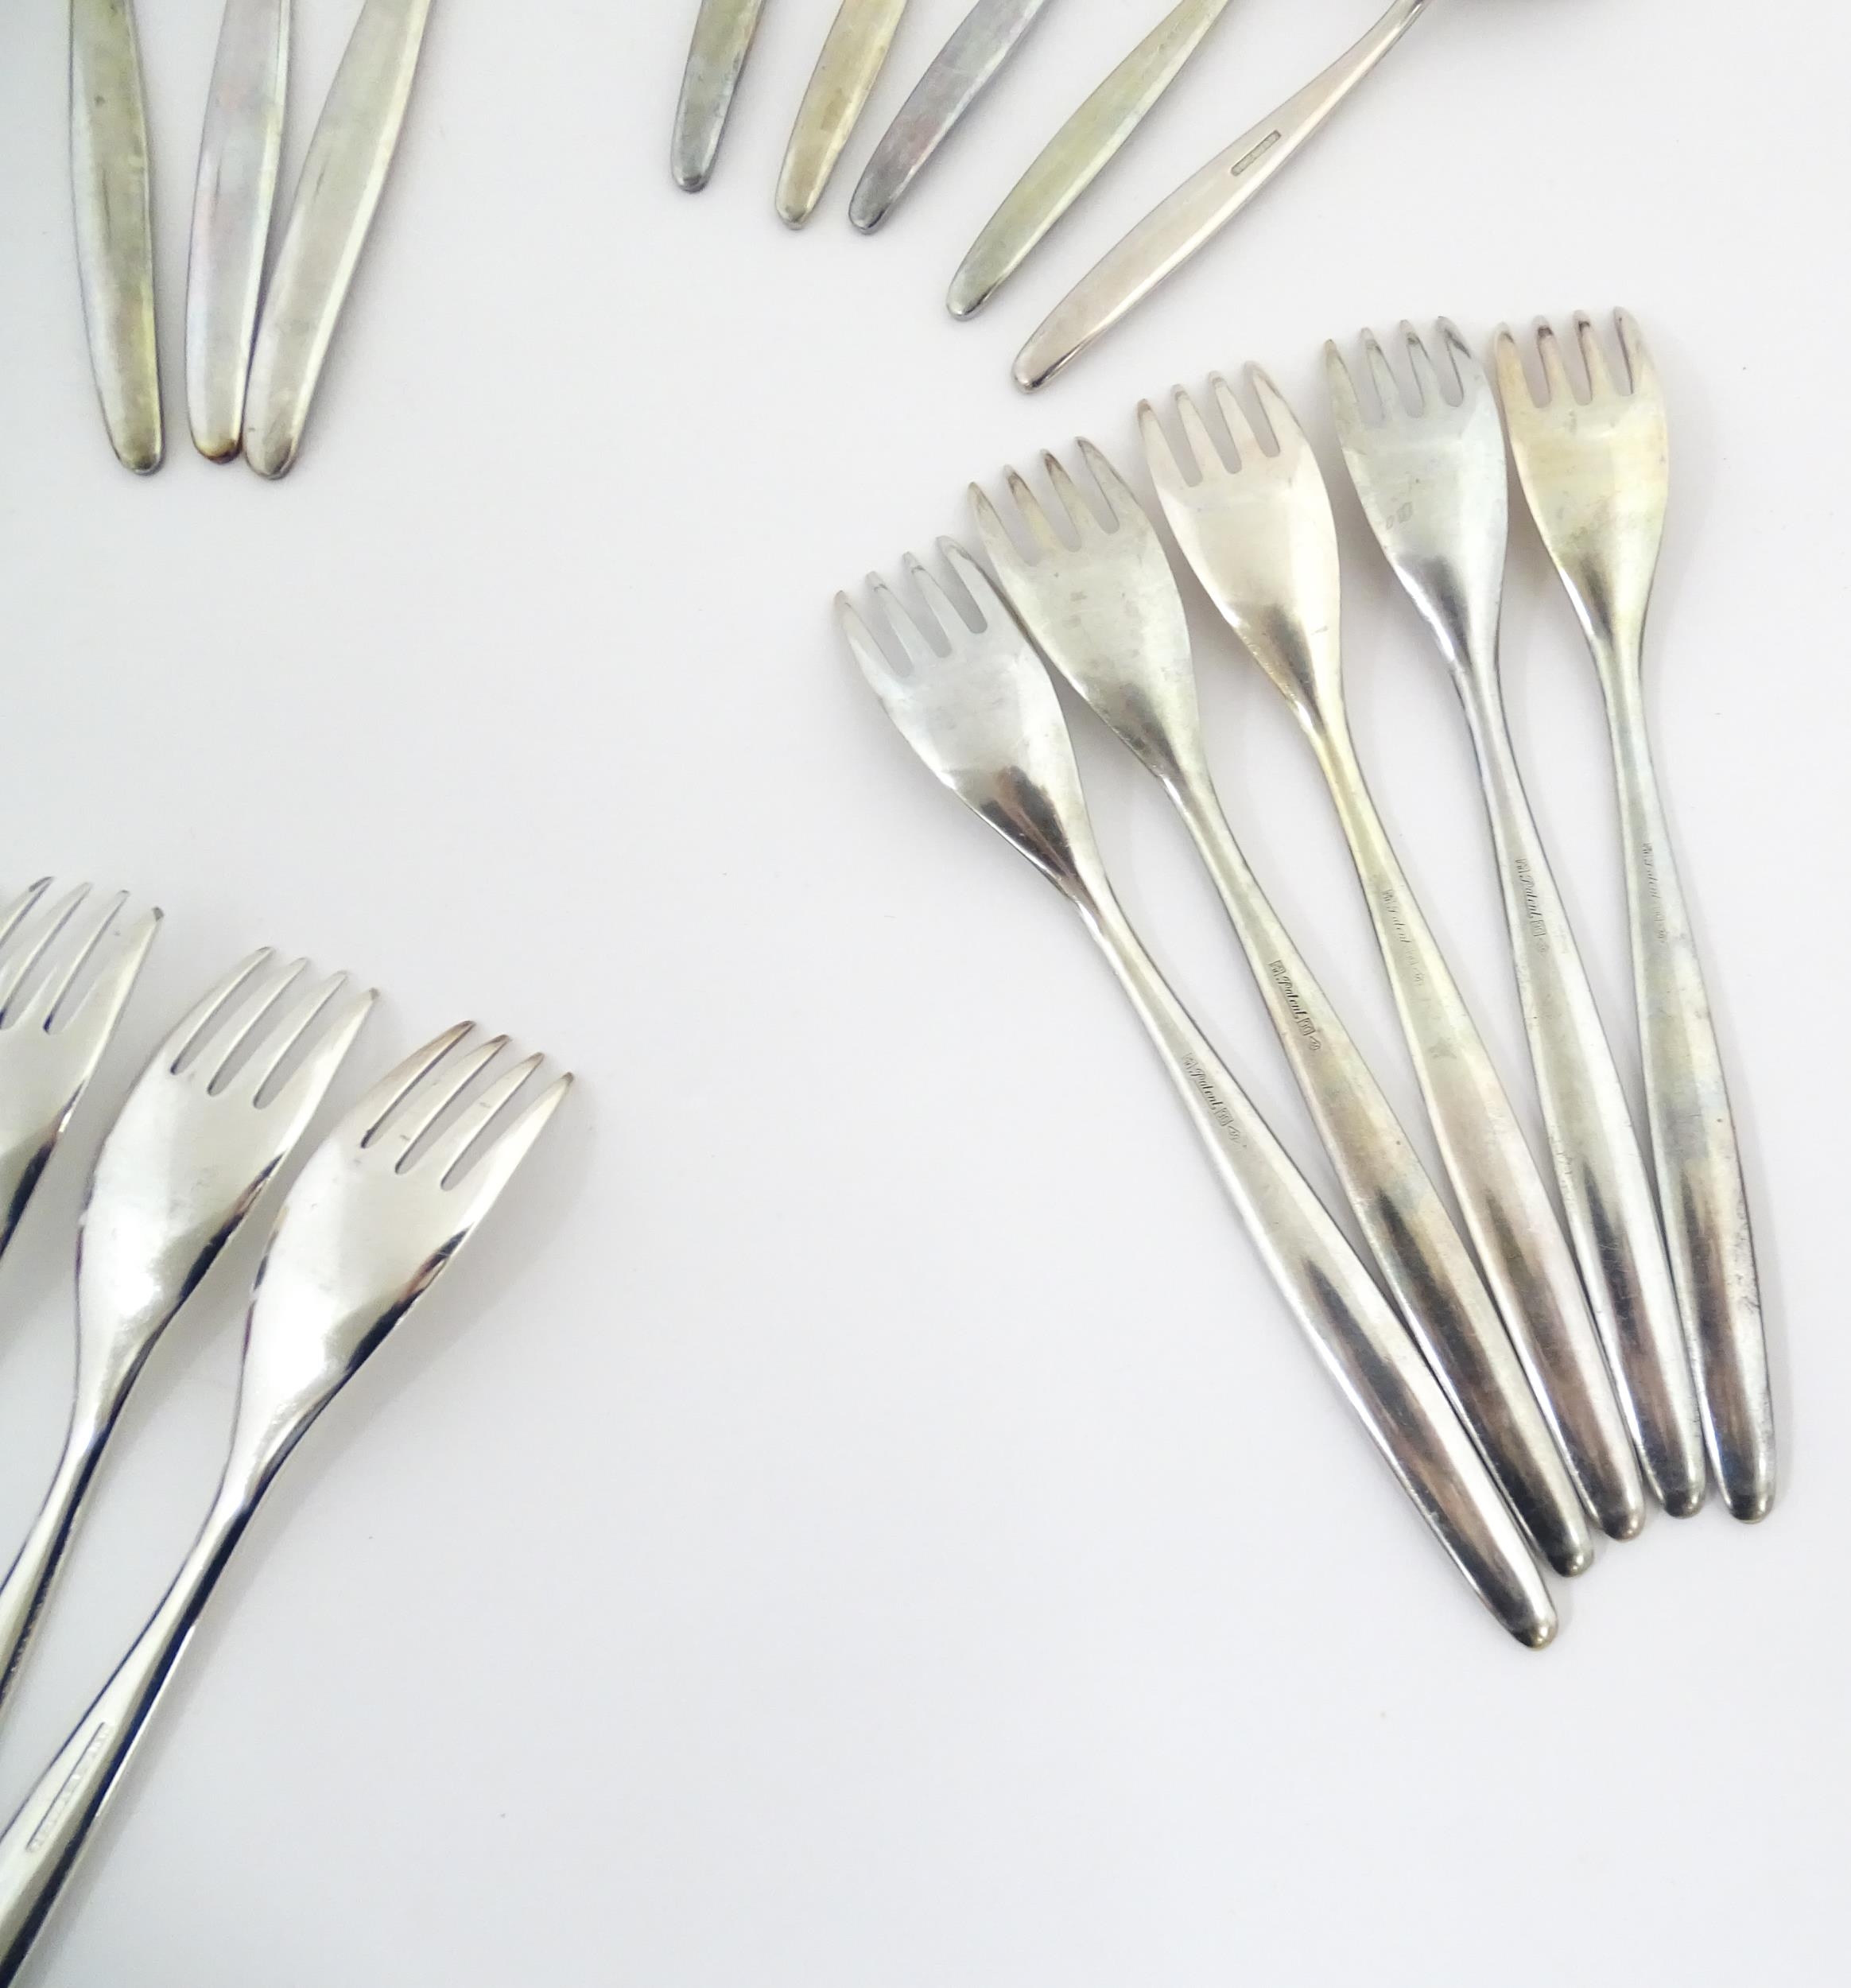 A quantity of WMF cutlery / flatware, to include knives, forks, spoons, etc. Knives approx. 8" - Image 10 of 16